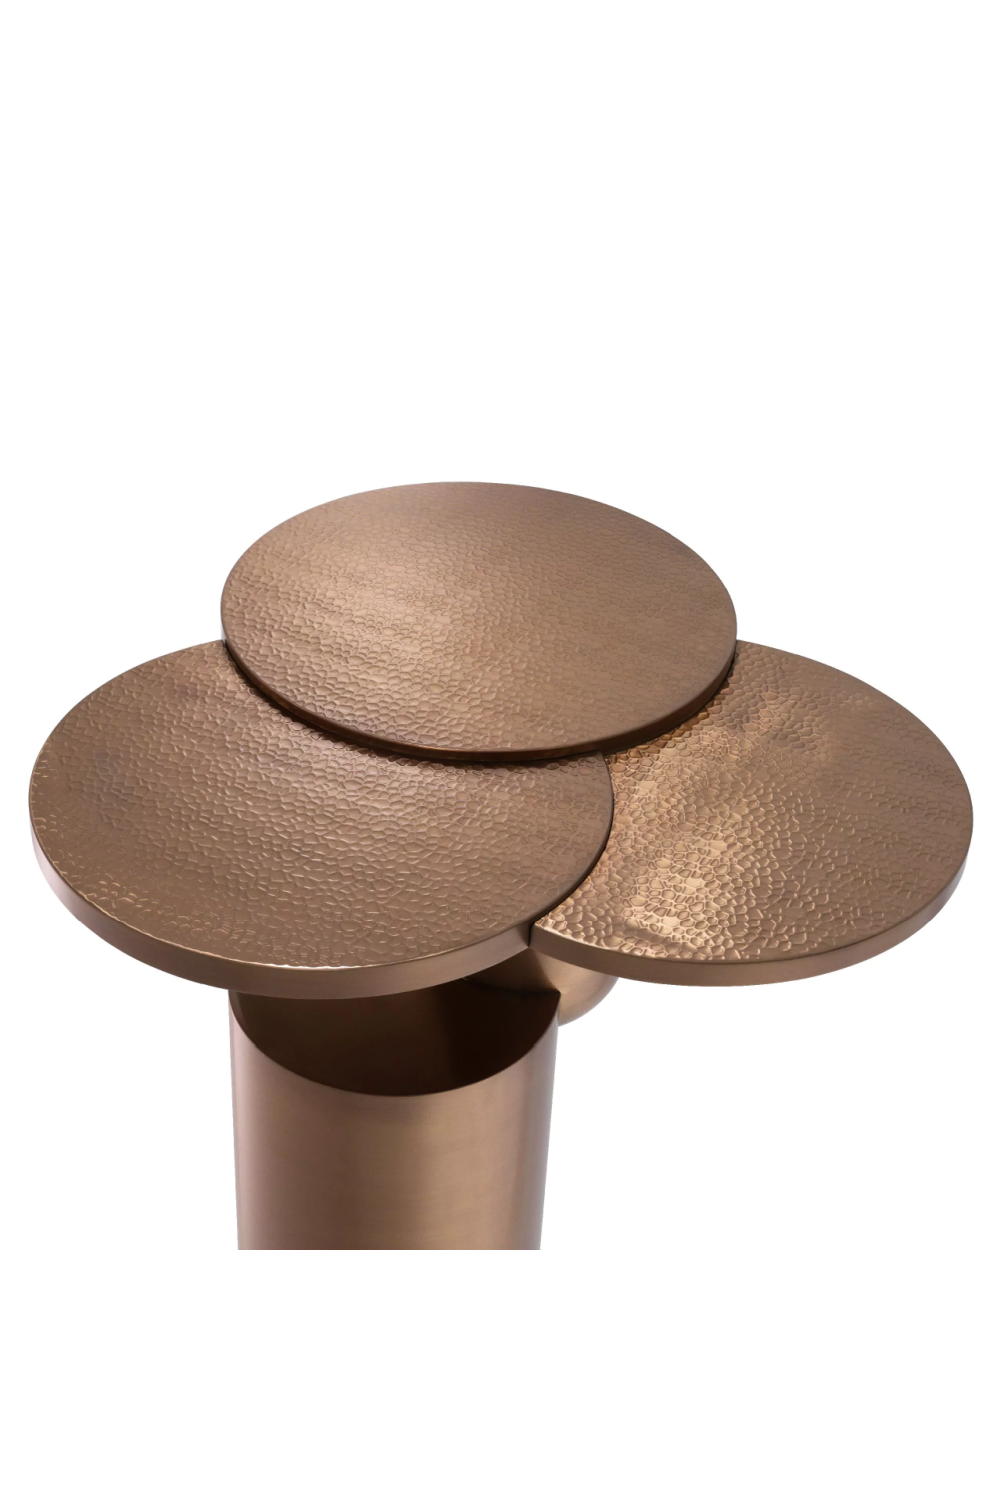 Copper Side Table | Eichholtz Armstrong | OROA